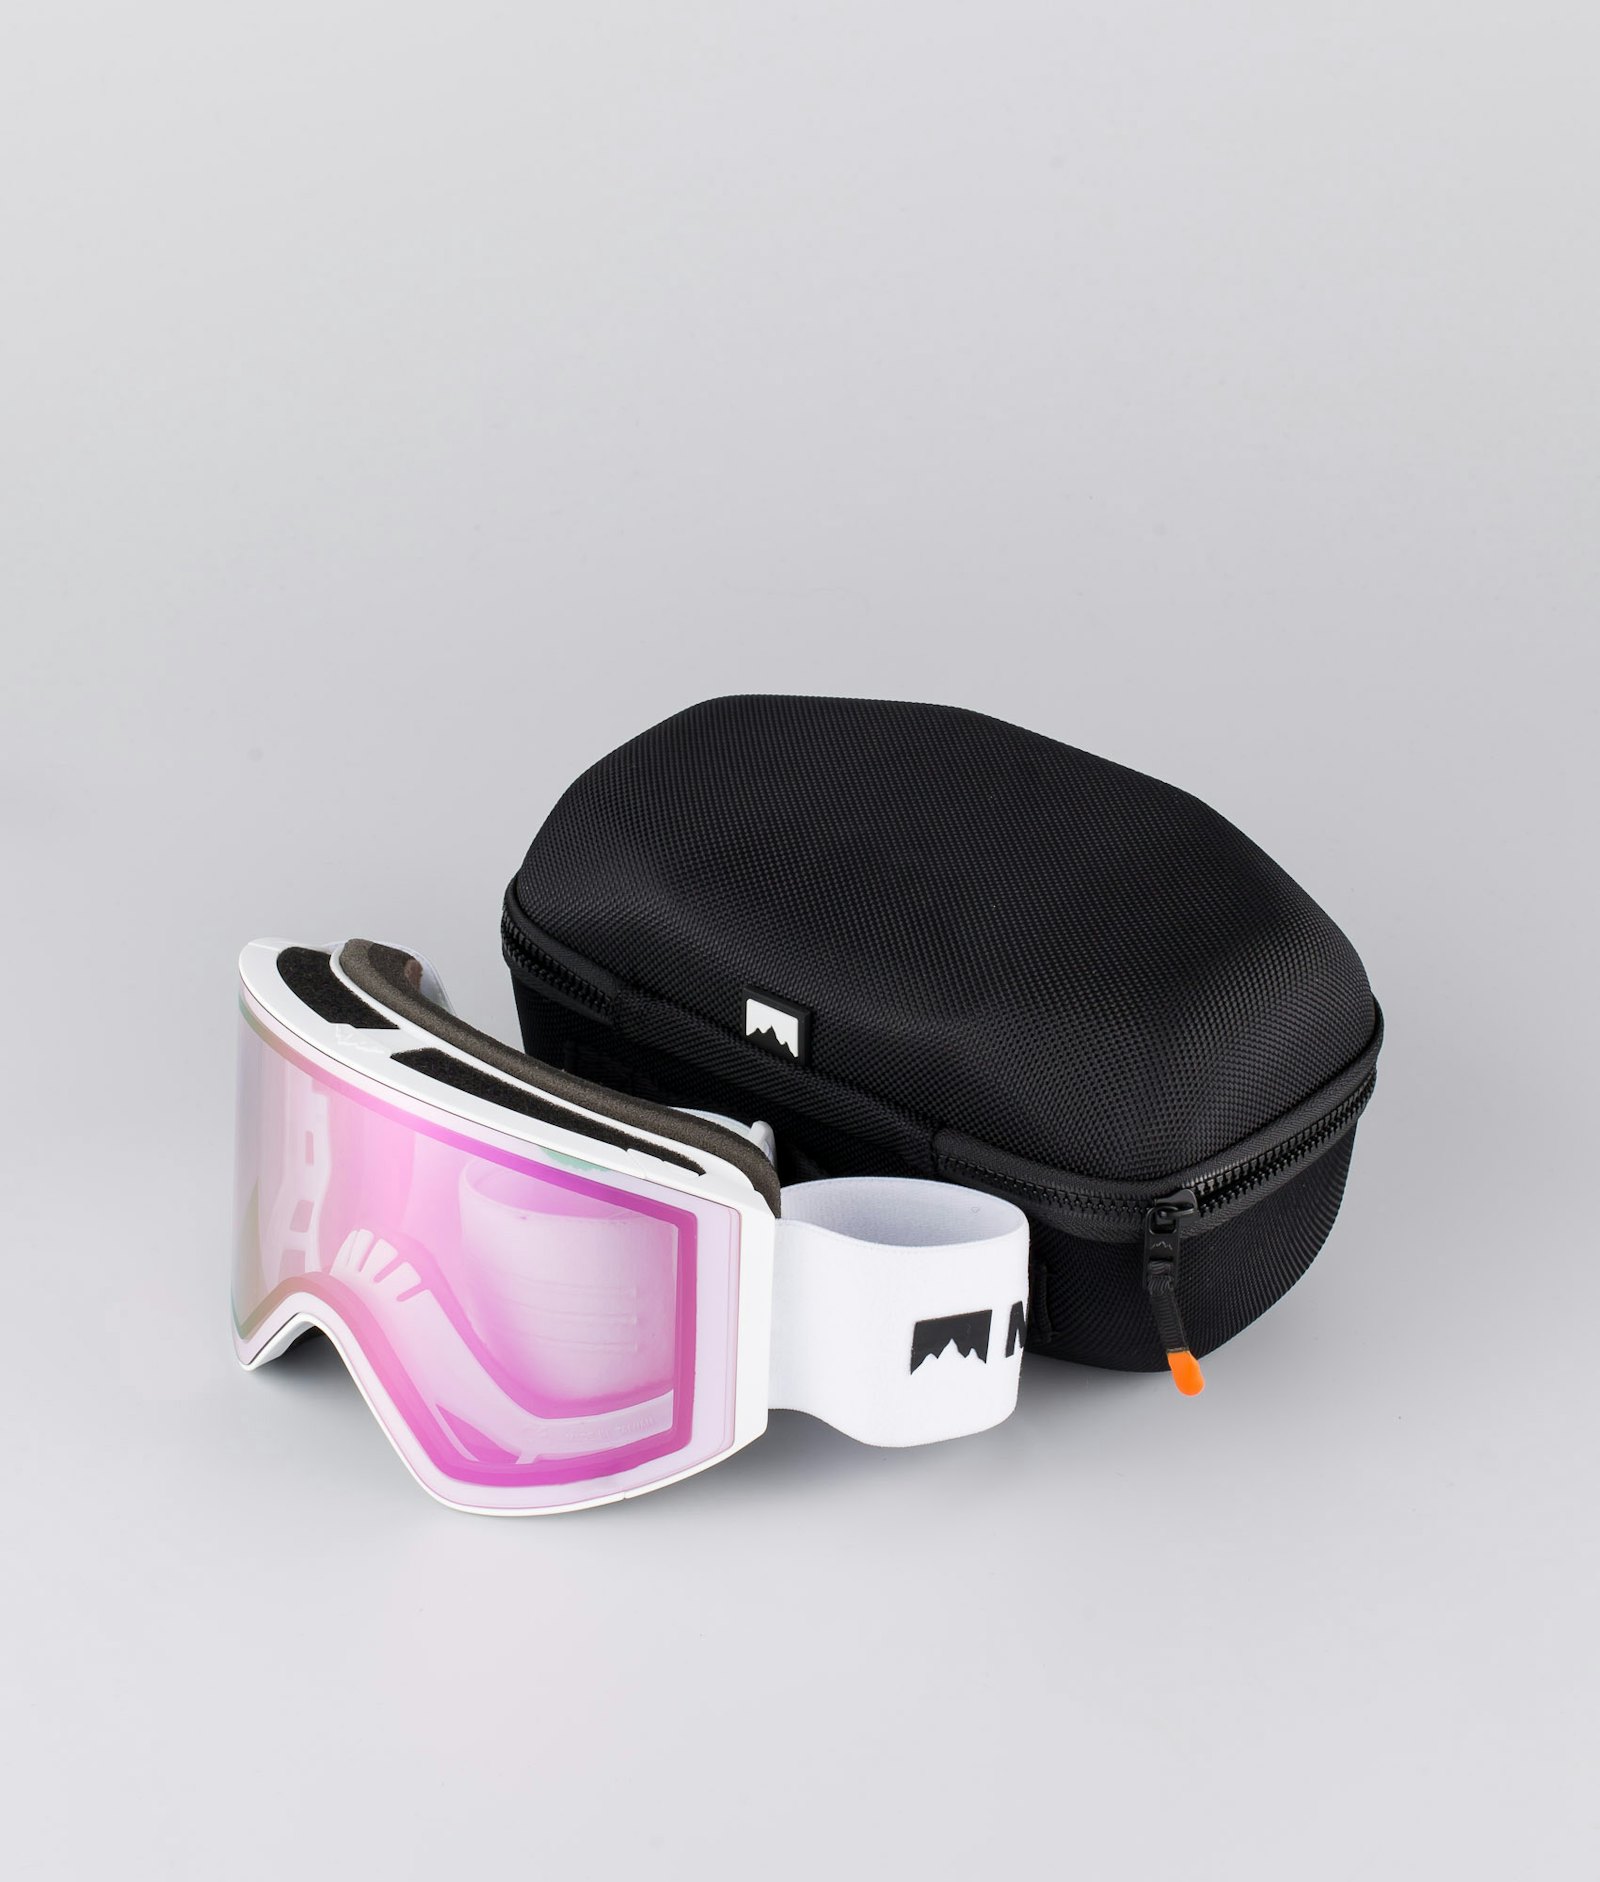 Scope 2020 Large Skibrille White/Pink Sapphire